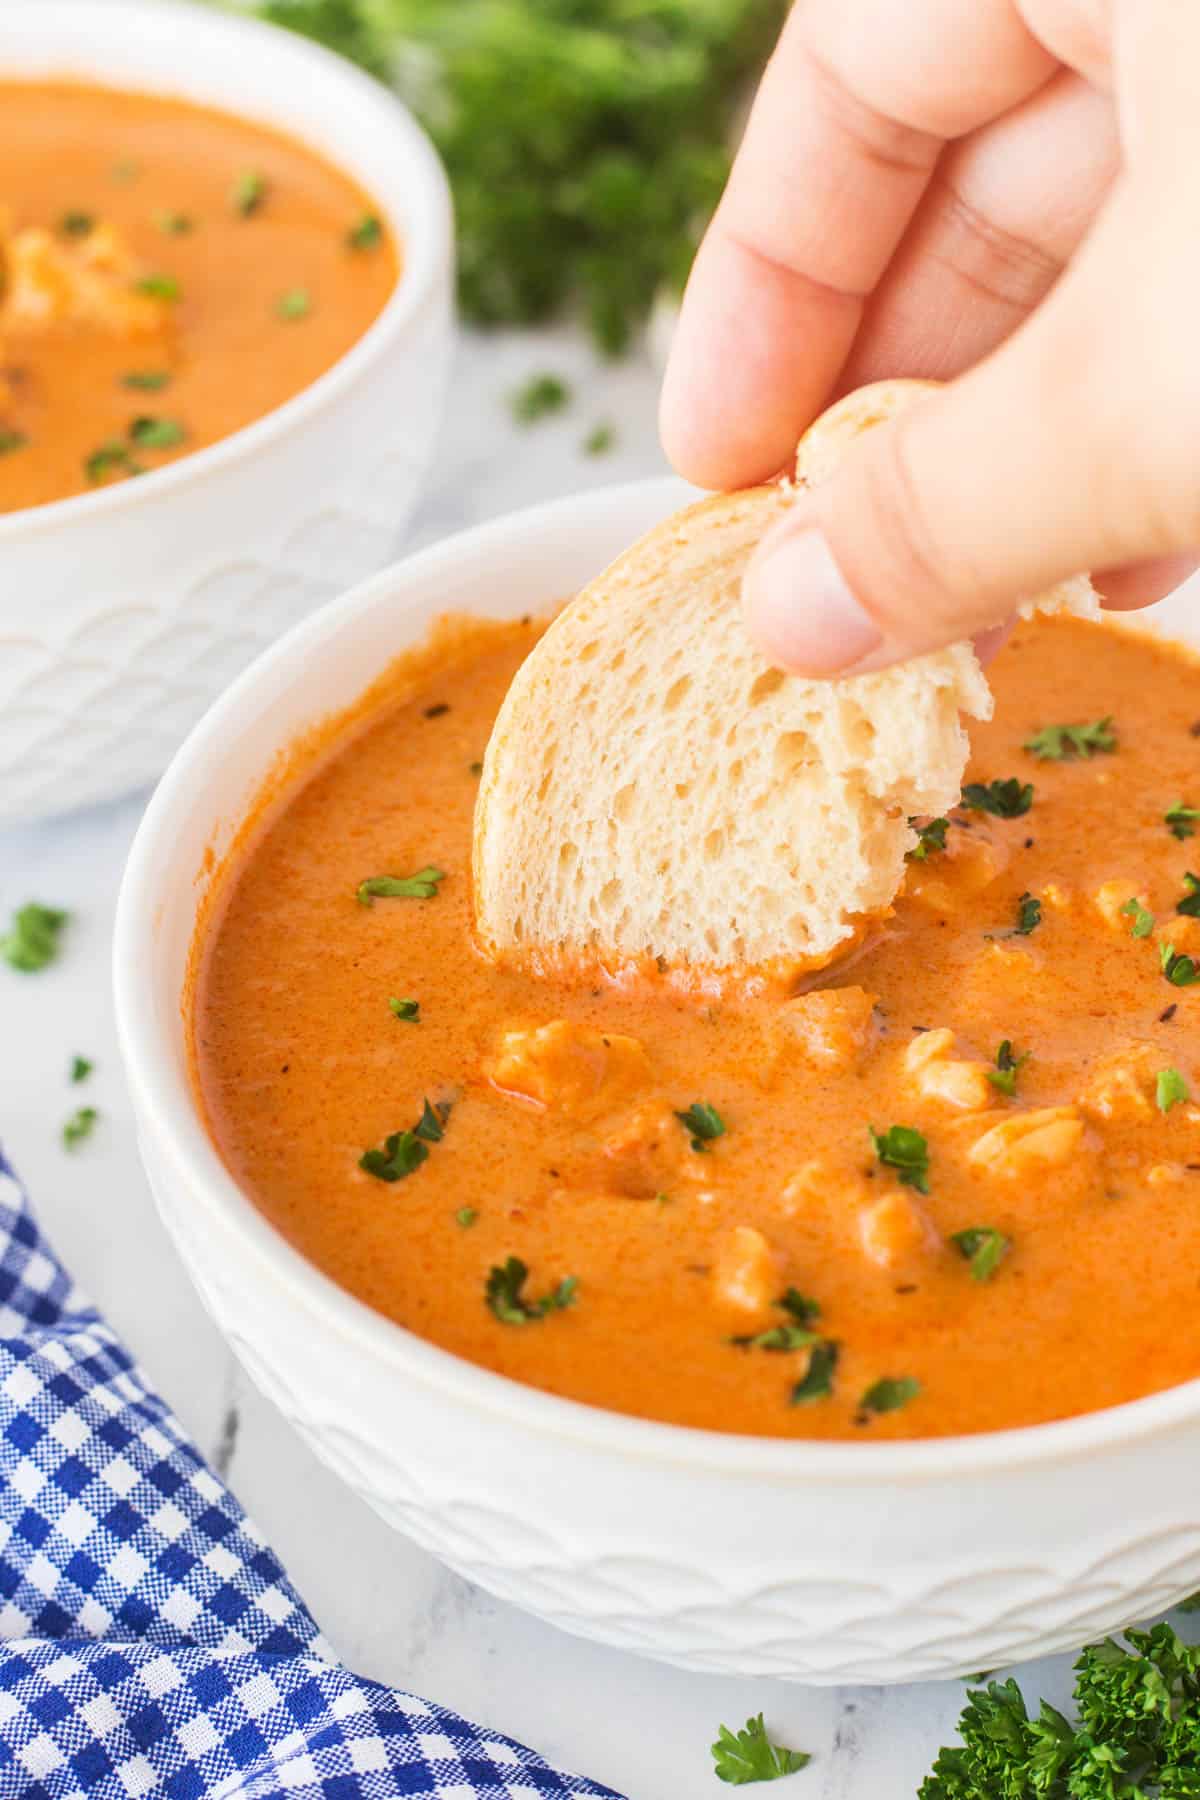 Dunking in a slice of bread into a bowlful of lobster bisque. 